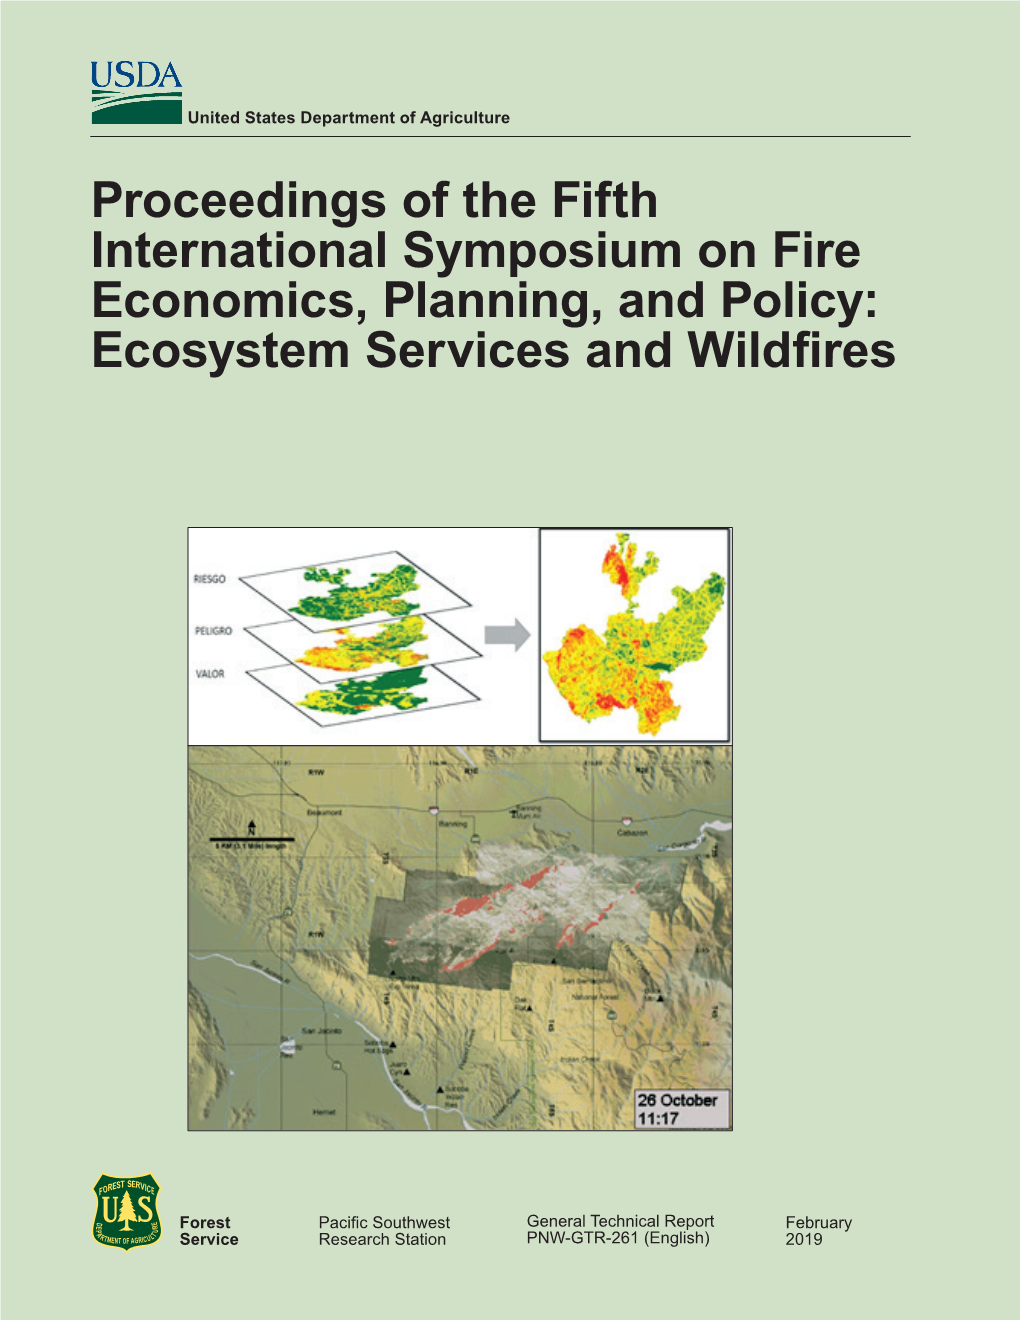 Proceedings of the Fifth International Symposium on Fire Economics, Planning, and Policy: Ecosystem Services and Wildfires